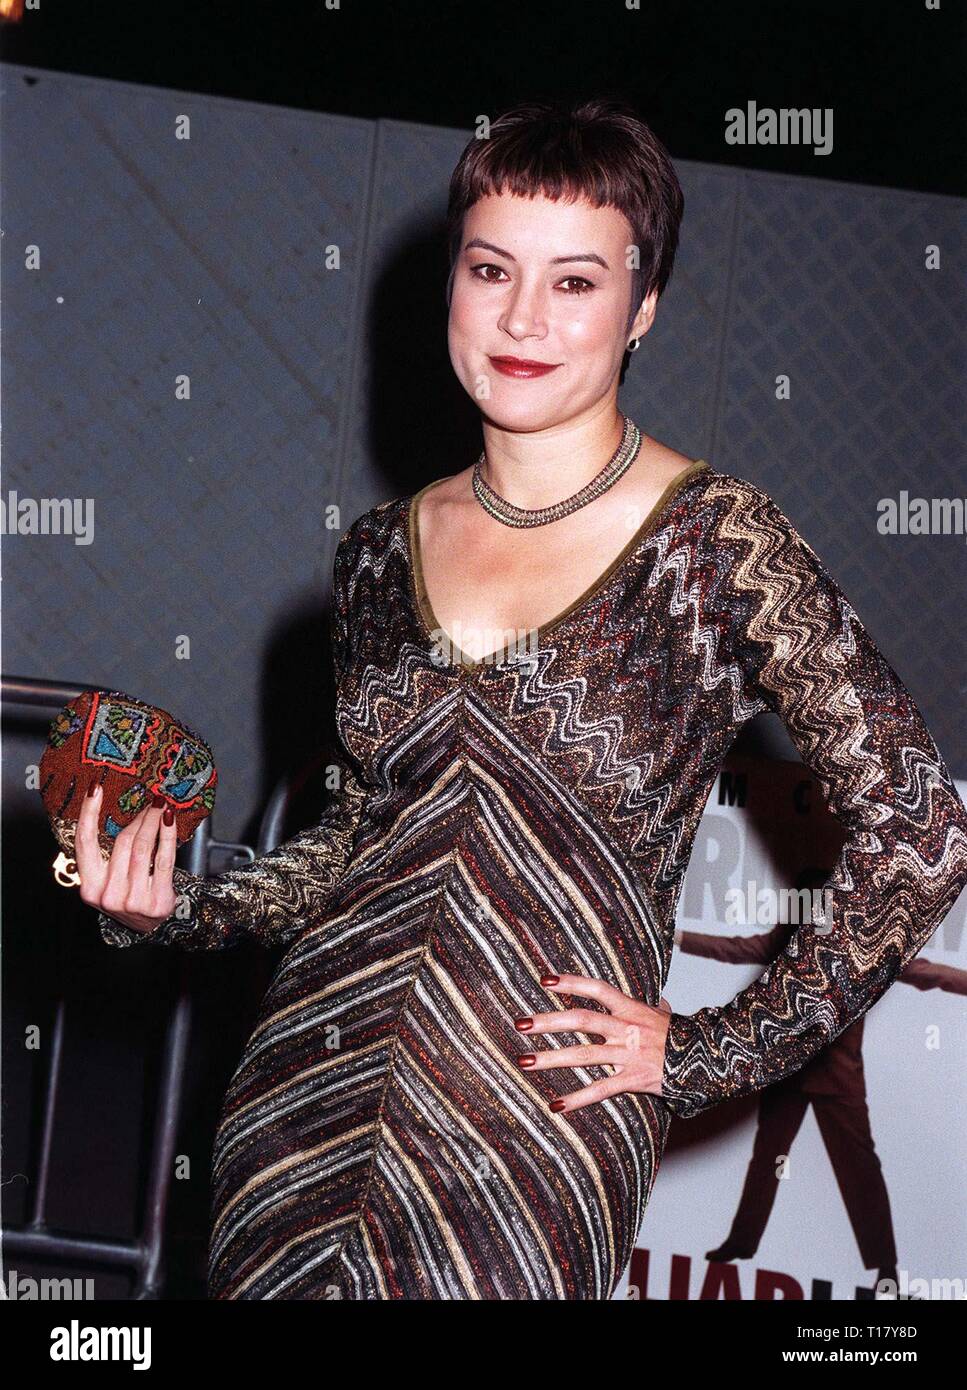 LOS ANGELES, CA. March 19, 1997:    Actress Jennifer Tilly at the premiere of her new movie, 'Liar Liar' in which she stars with Jim Carrey. Pix: PAUL SMITH Stock Photo